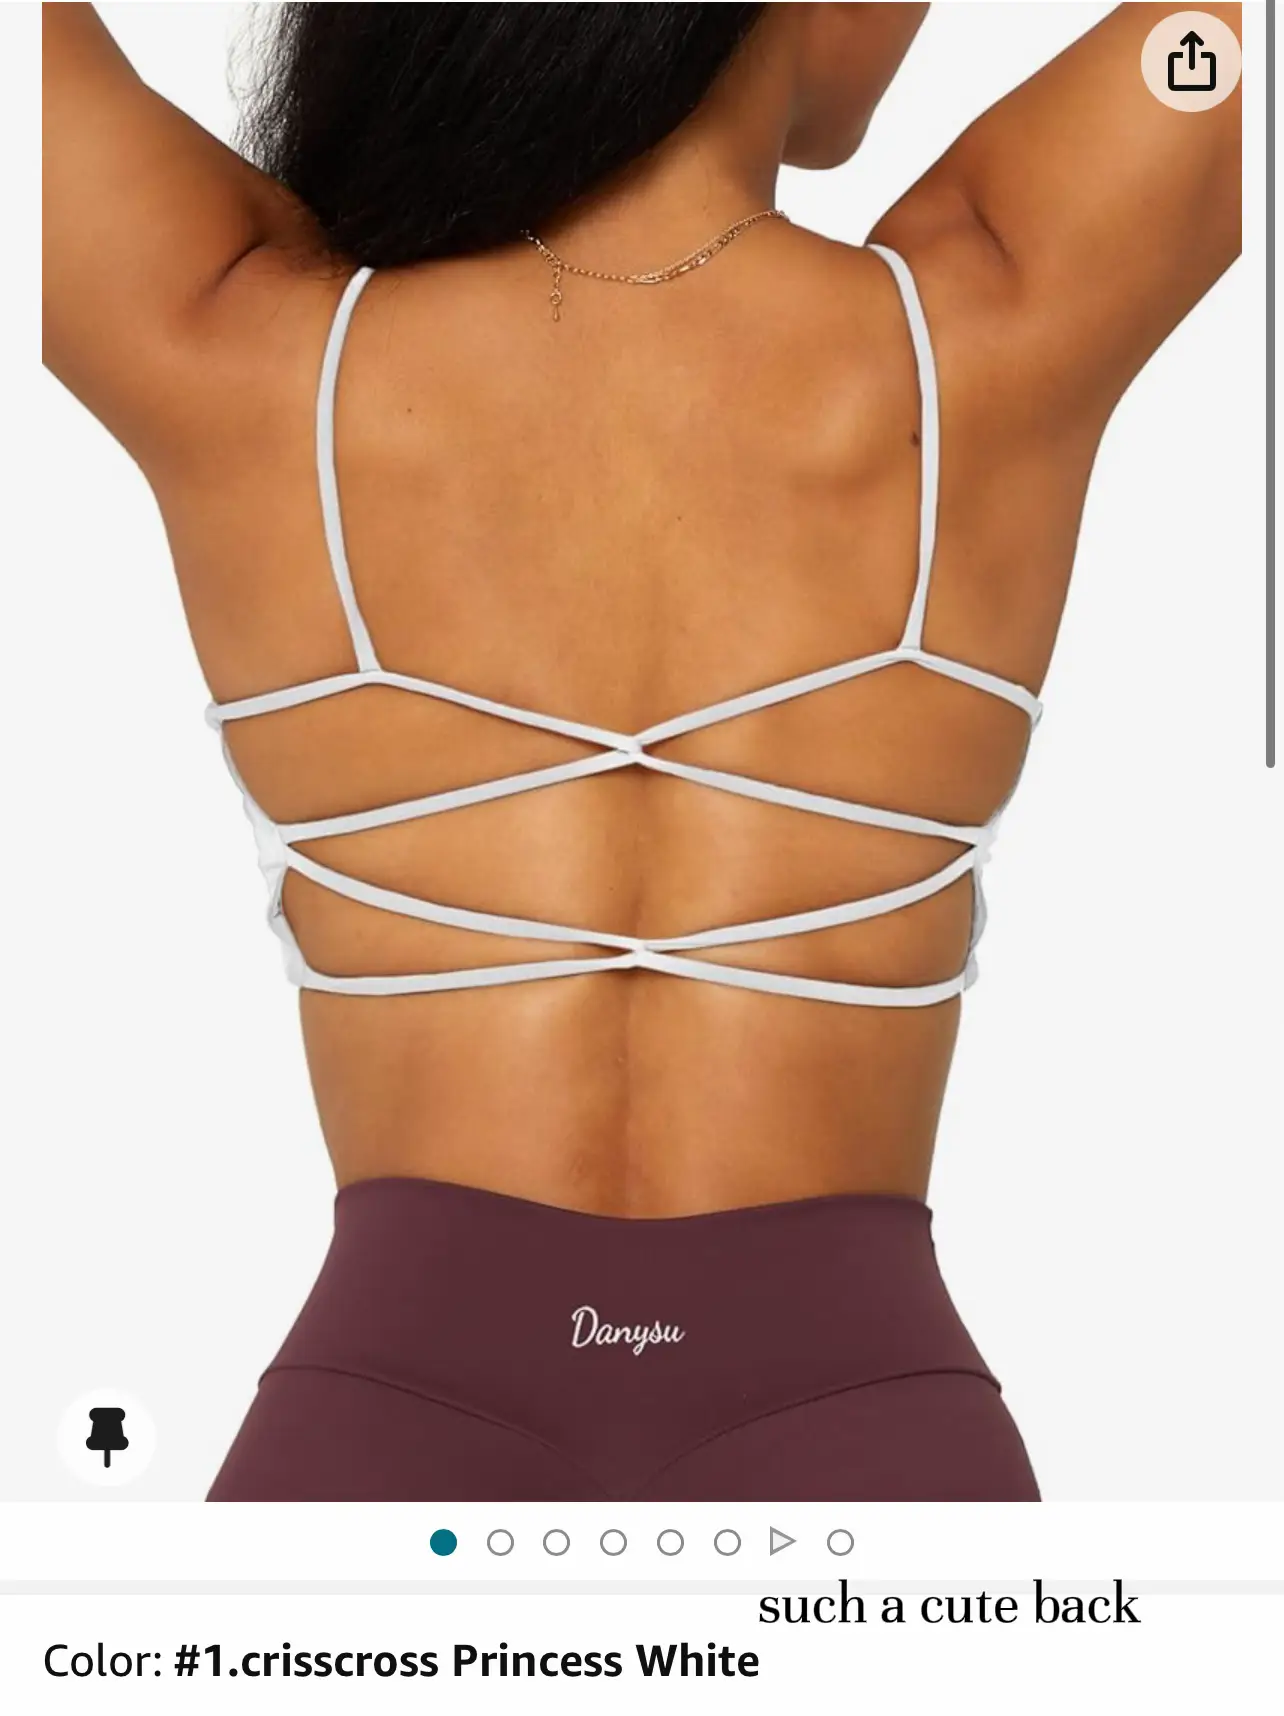 backless gym tops for women - Lemon8 Search